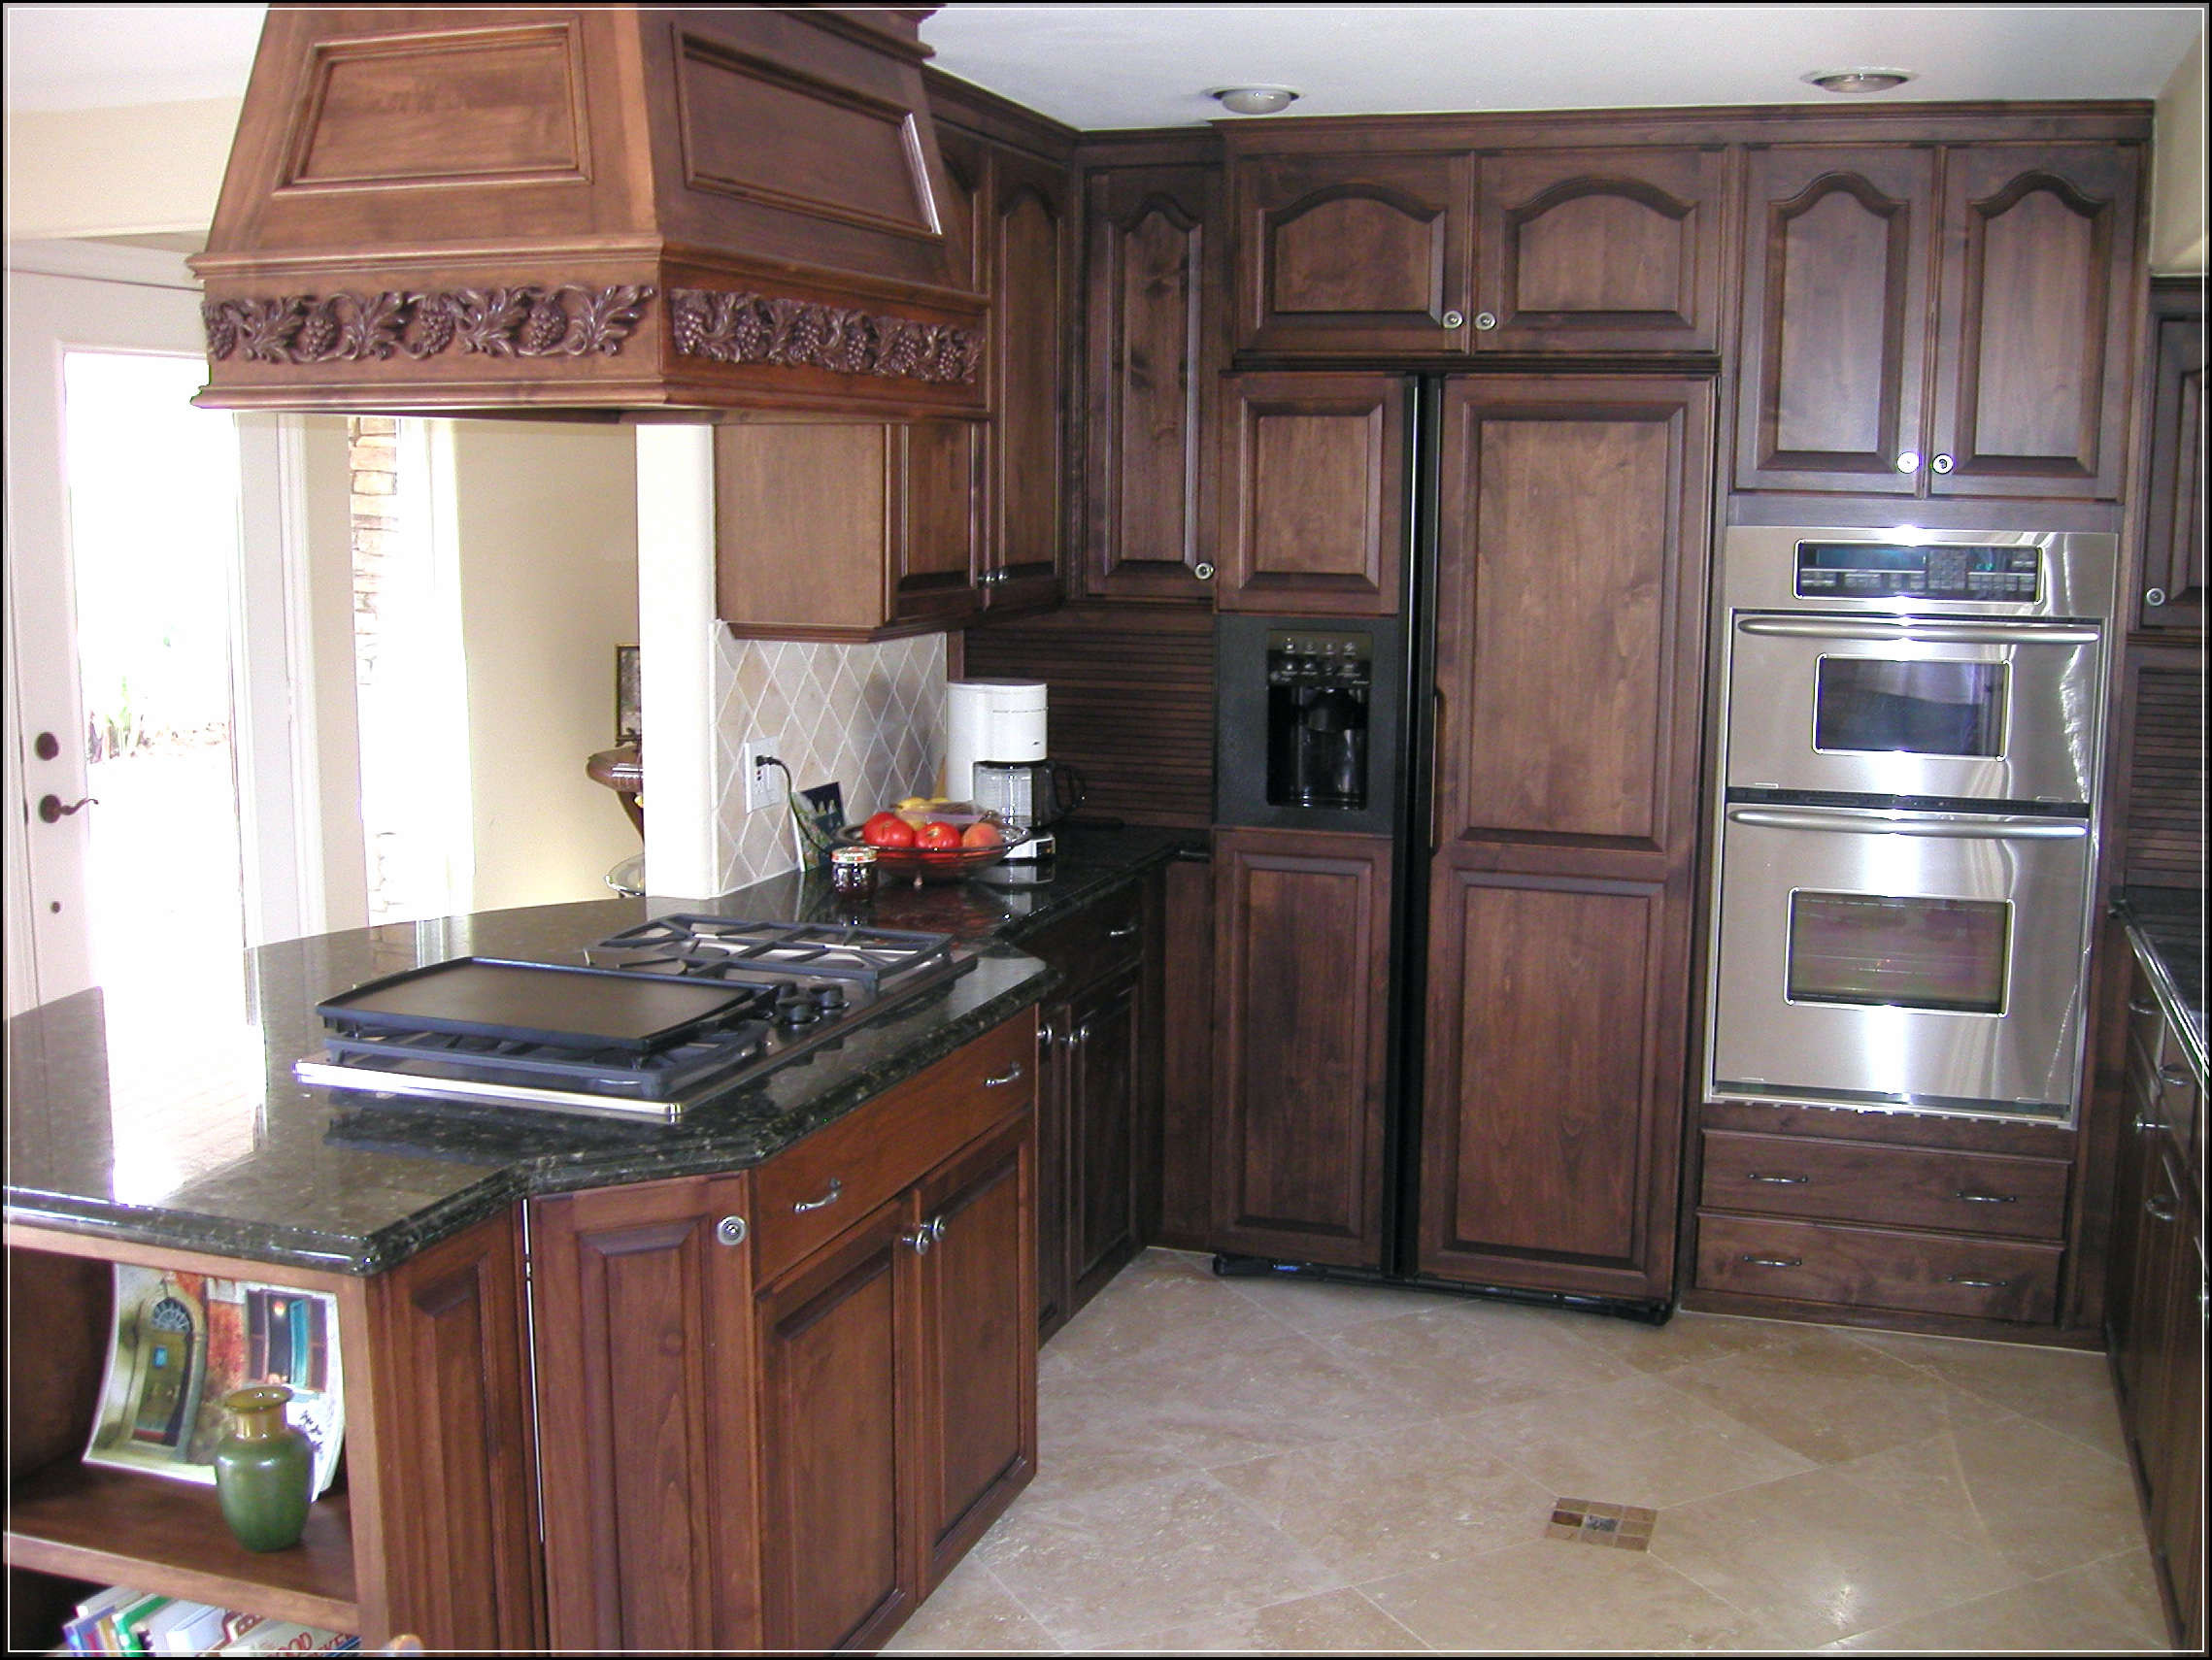 Are Oak Kitchen Cabinets Outdated
 Oak Kitchen Cabinets At Lowes 2019 Are Outdated And